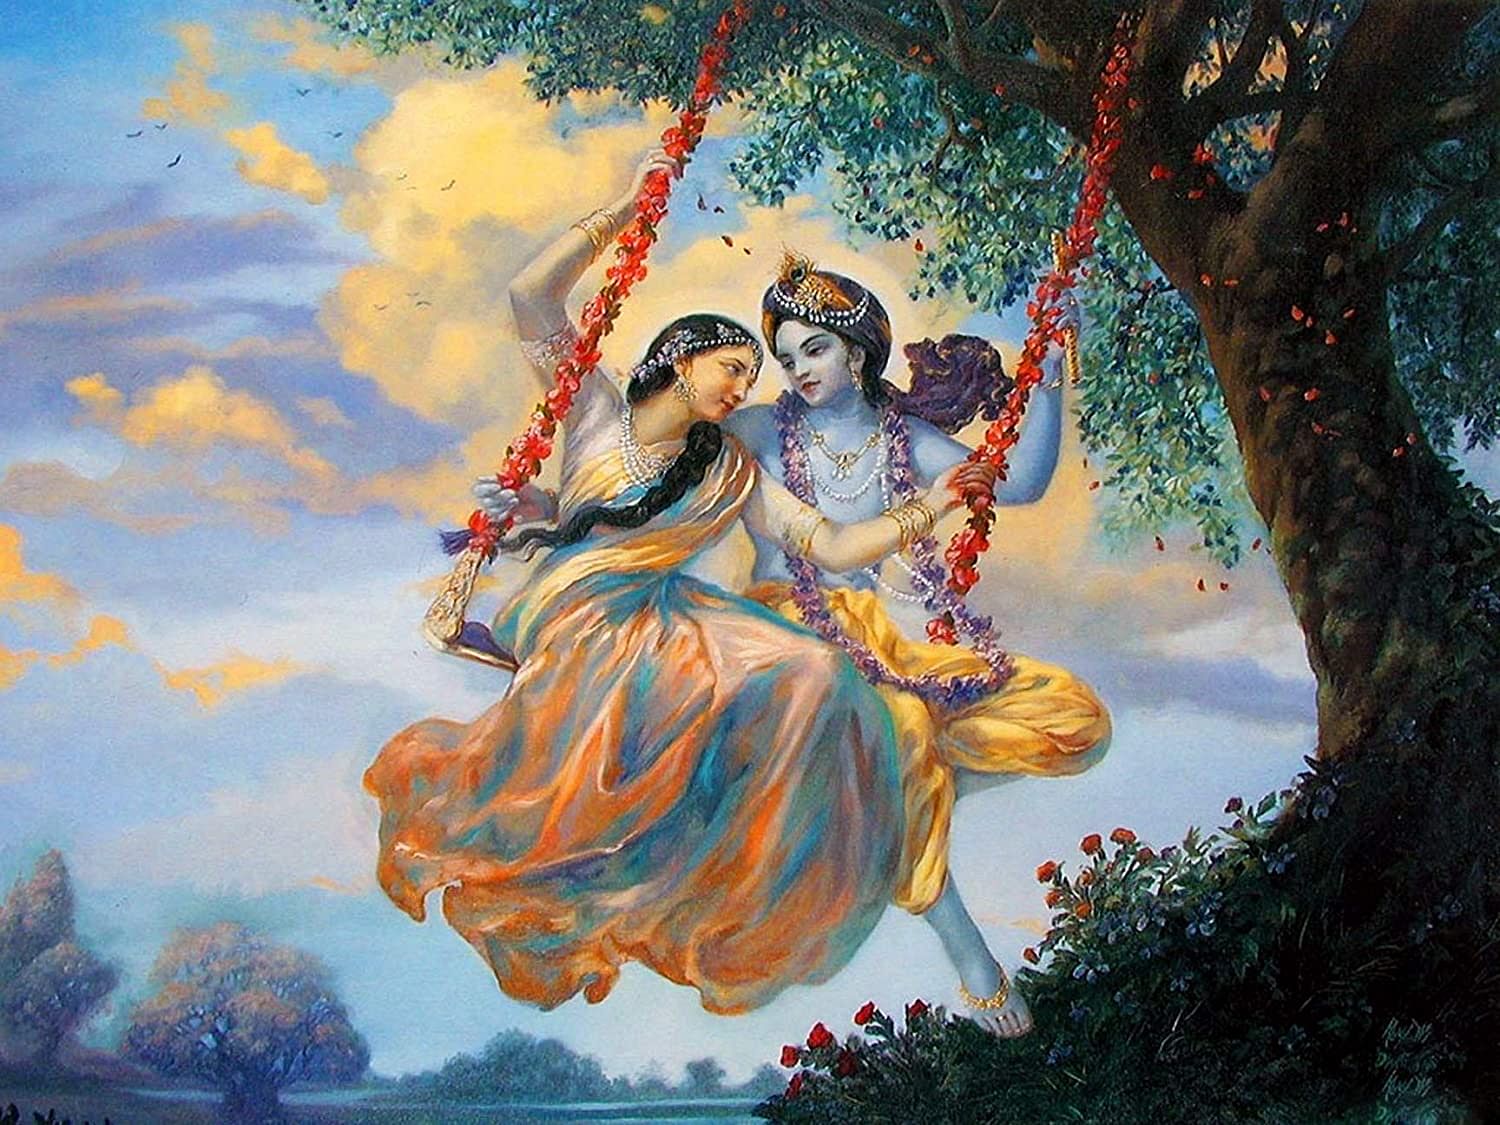 Five intresting facts about relationship of Radha and Krishna